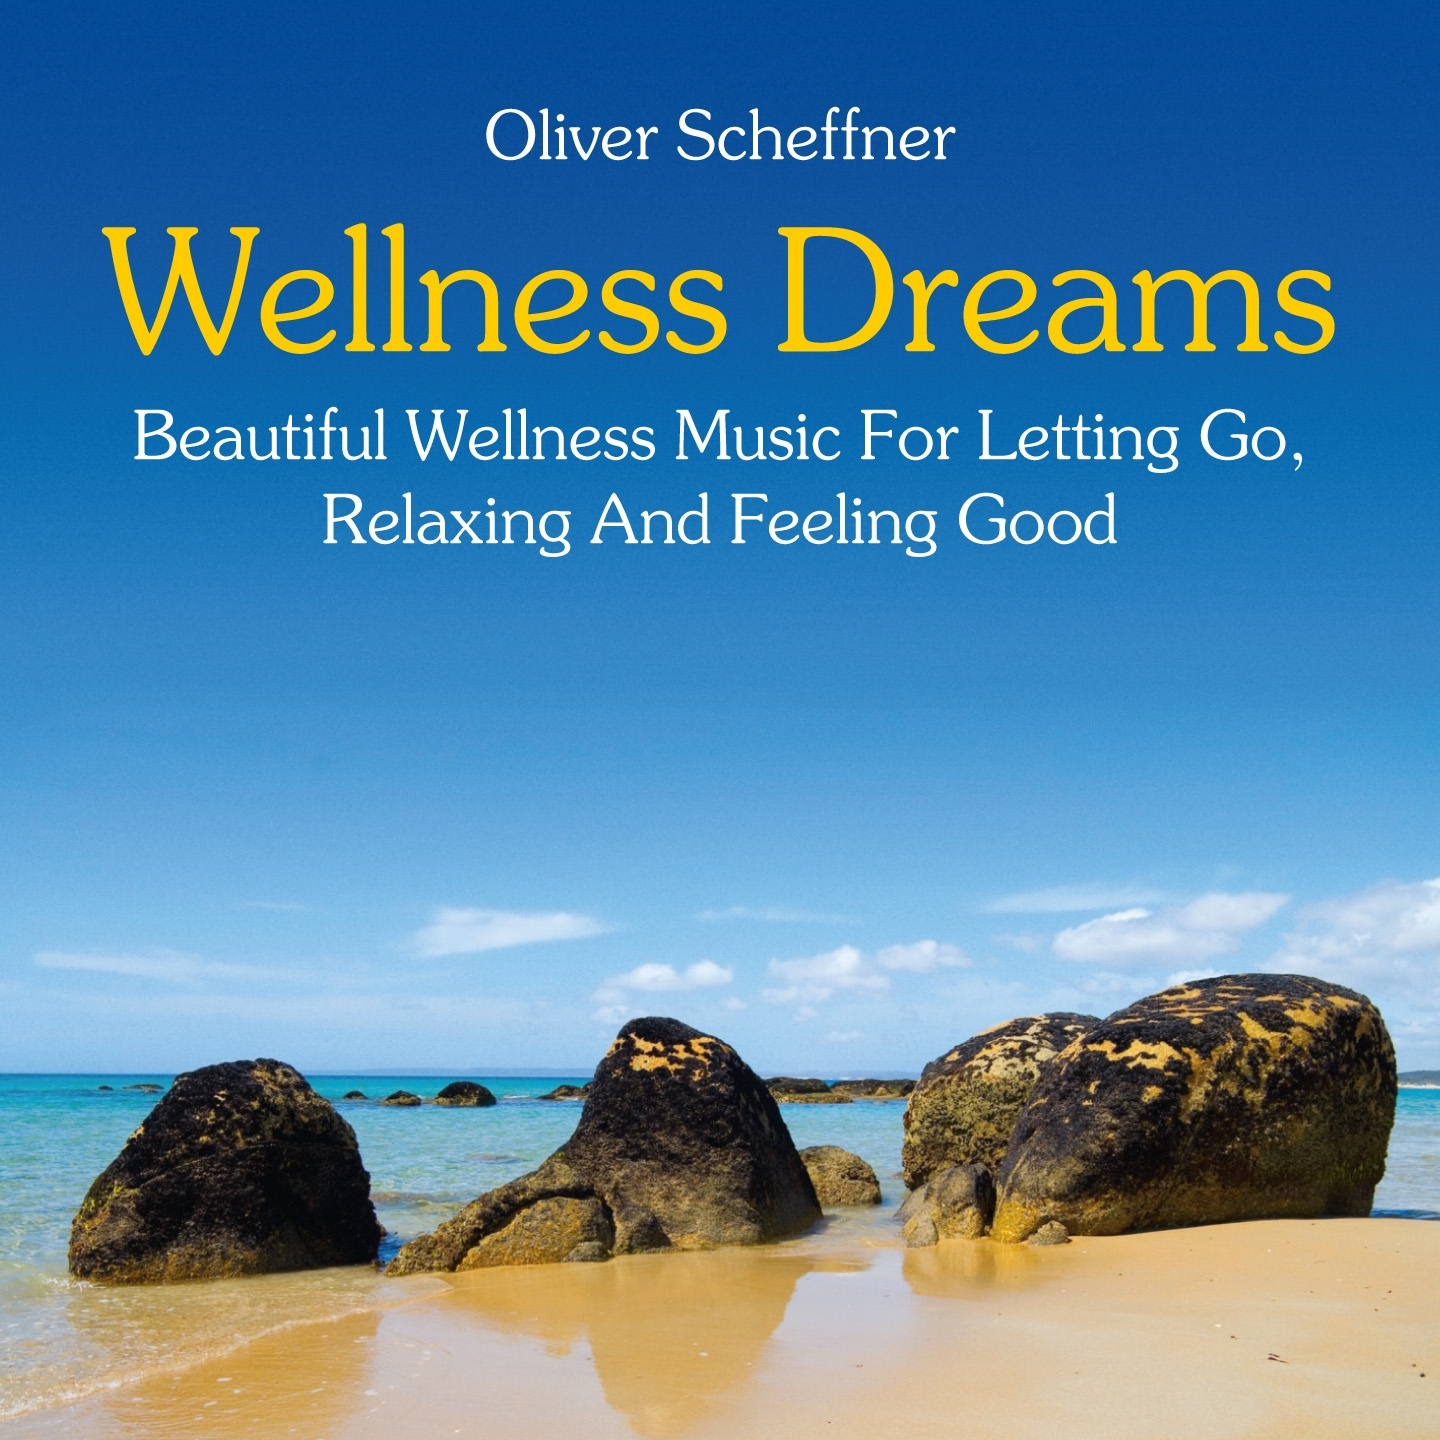 Wellness Dreams: Music for Letting Go, Relaxing and Feeling Good